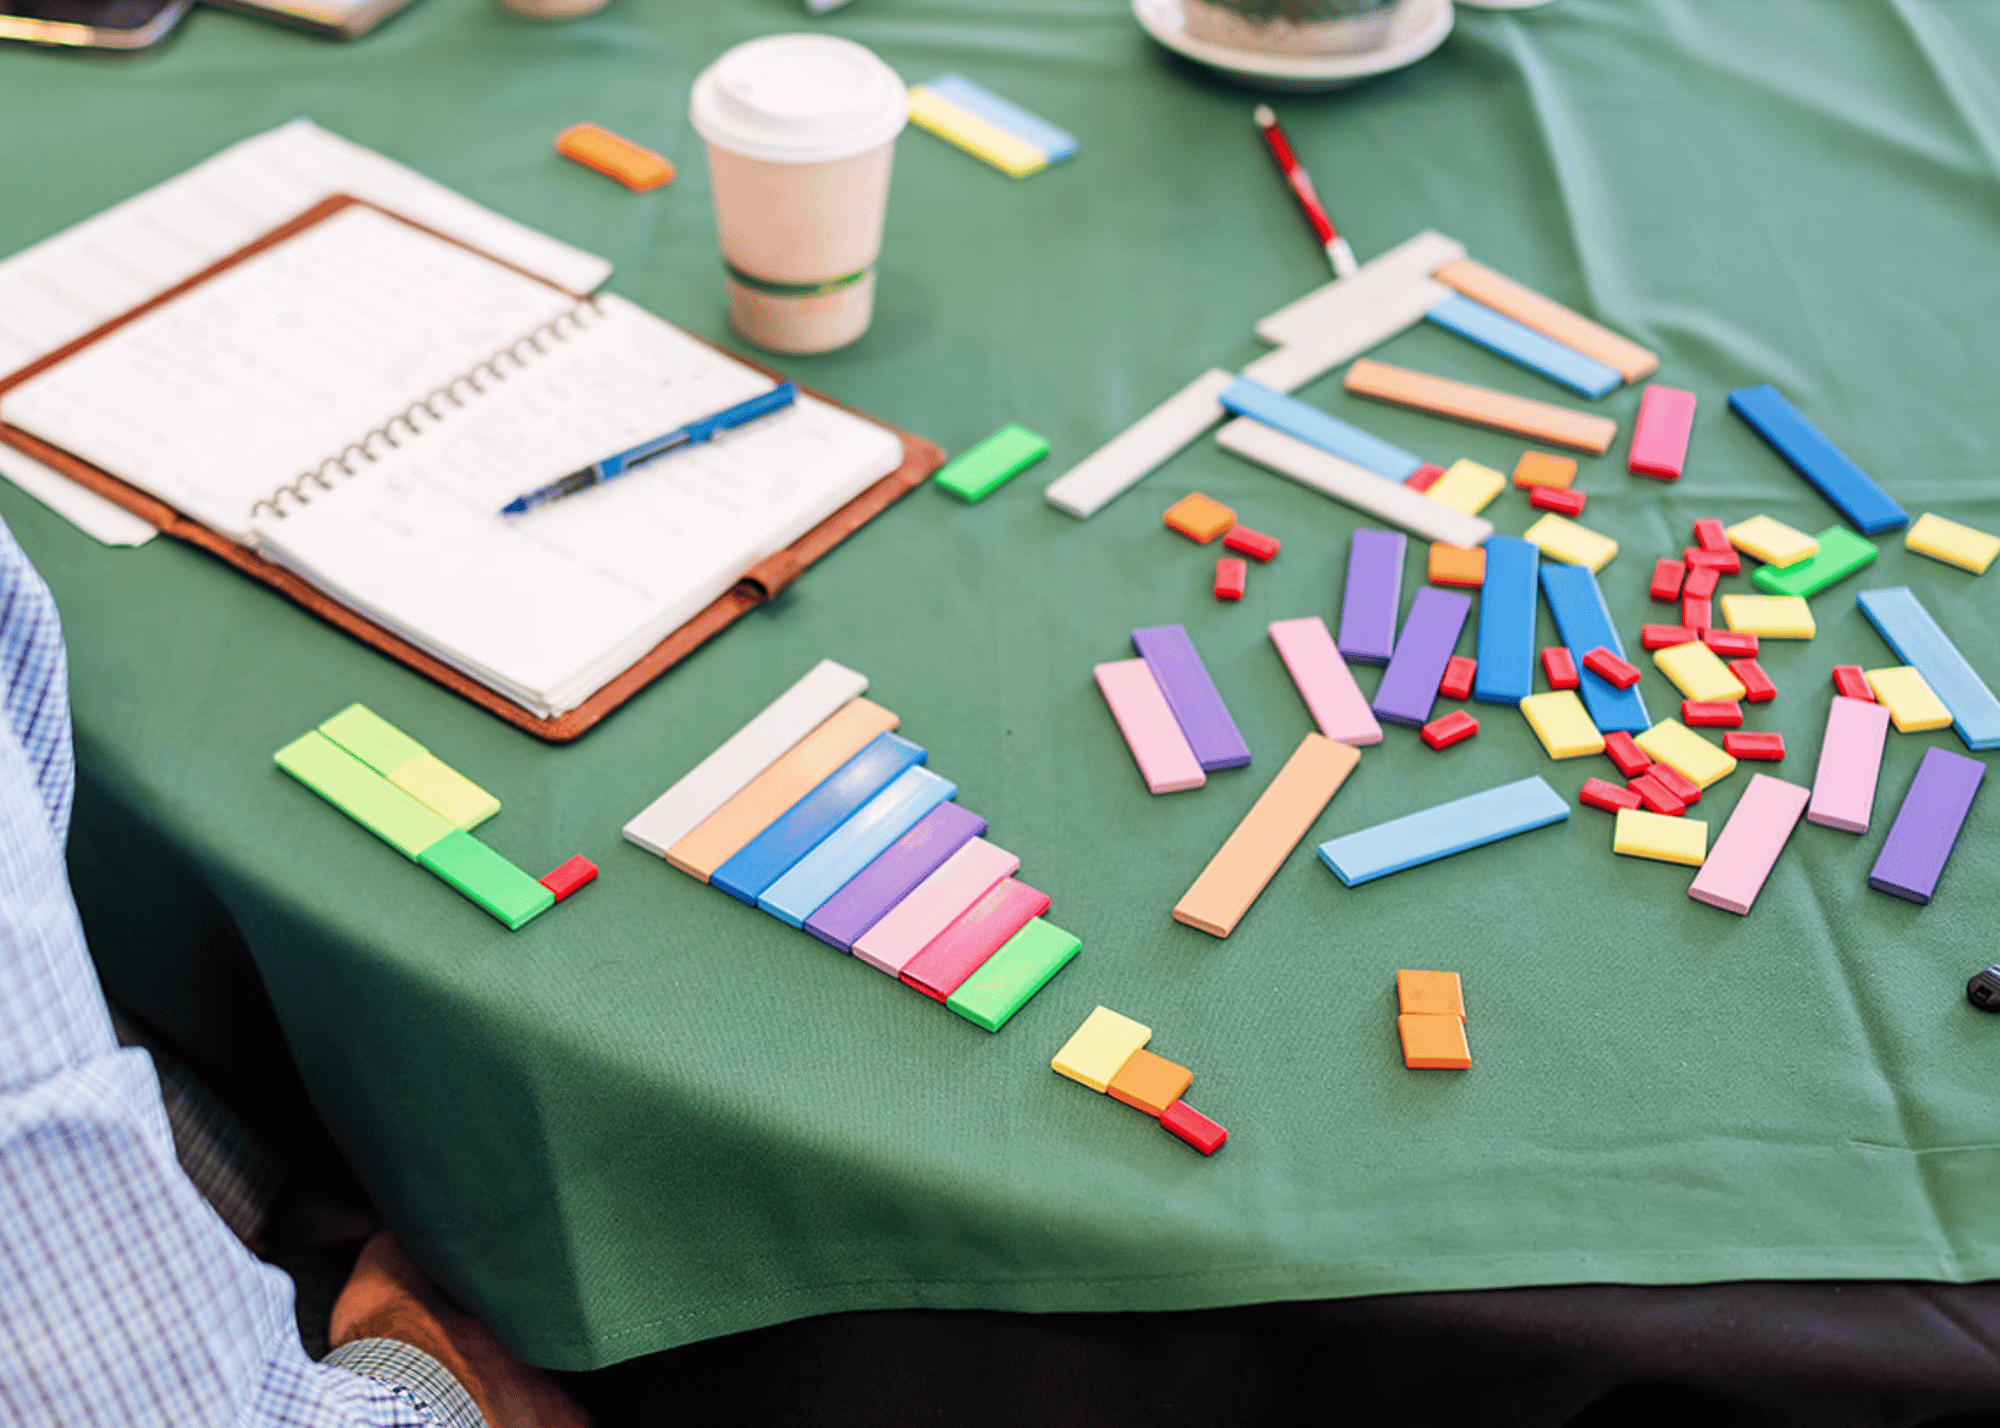 Conference table with notebook and colorful manipulatives